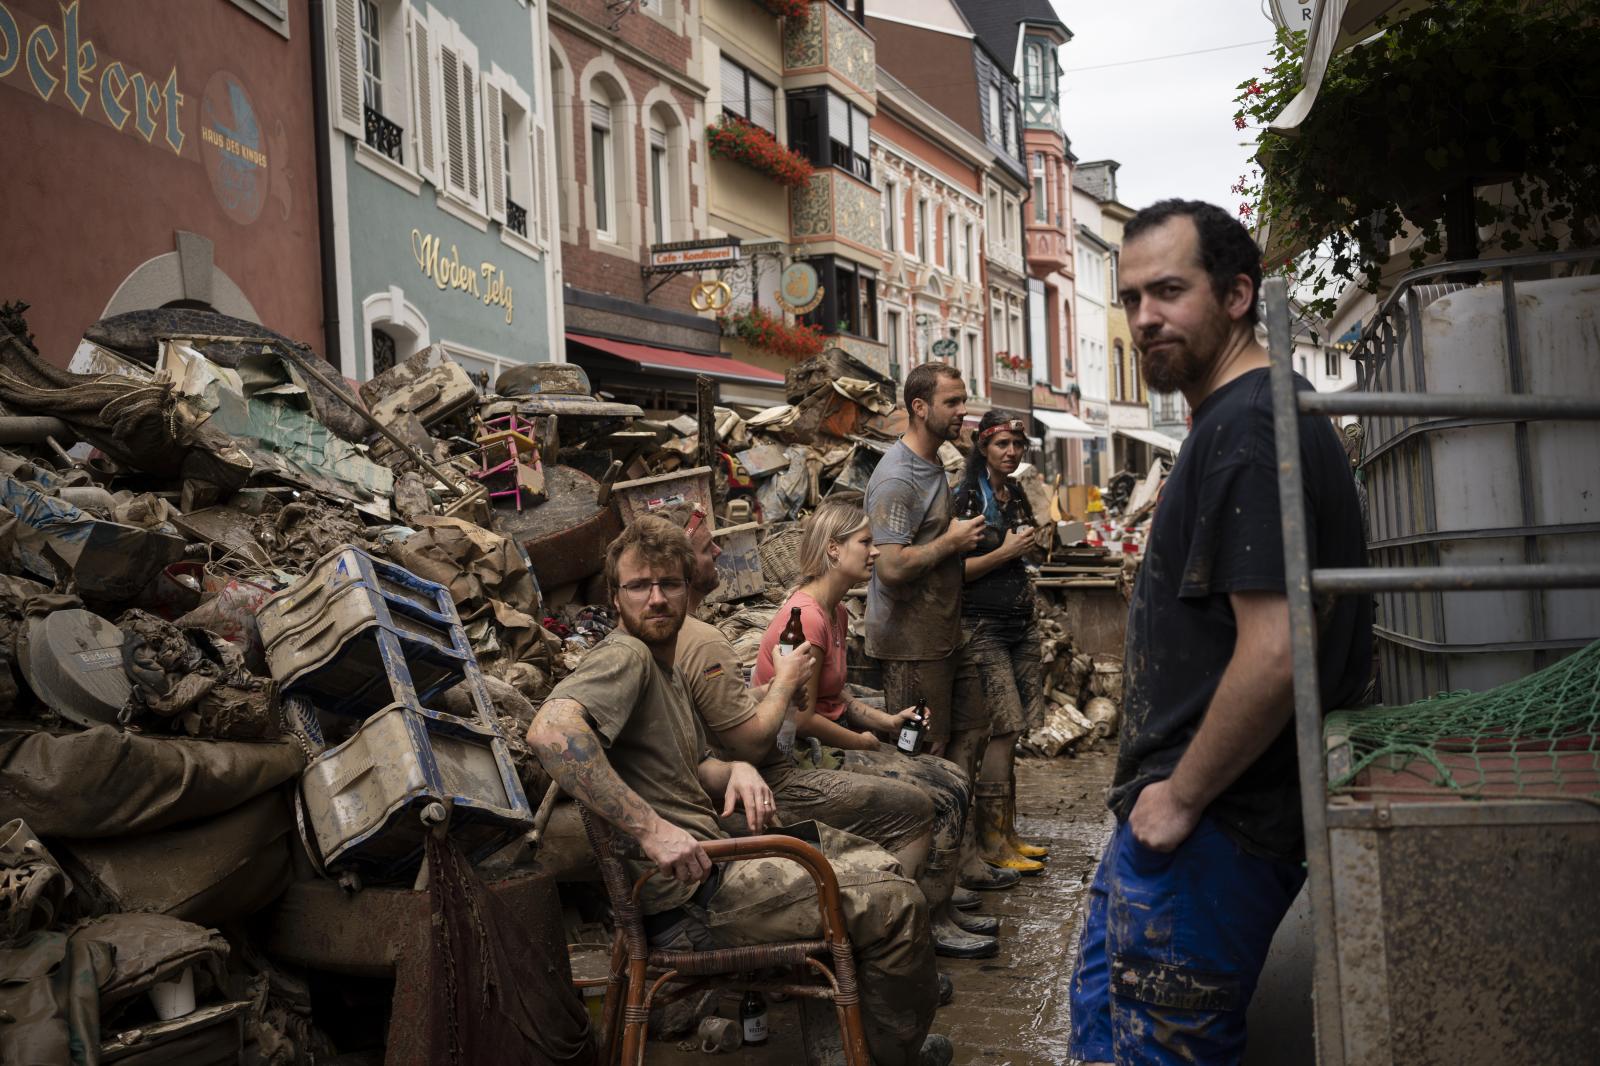 Image from SINGLES - People take a break from cleaning the debris from the...